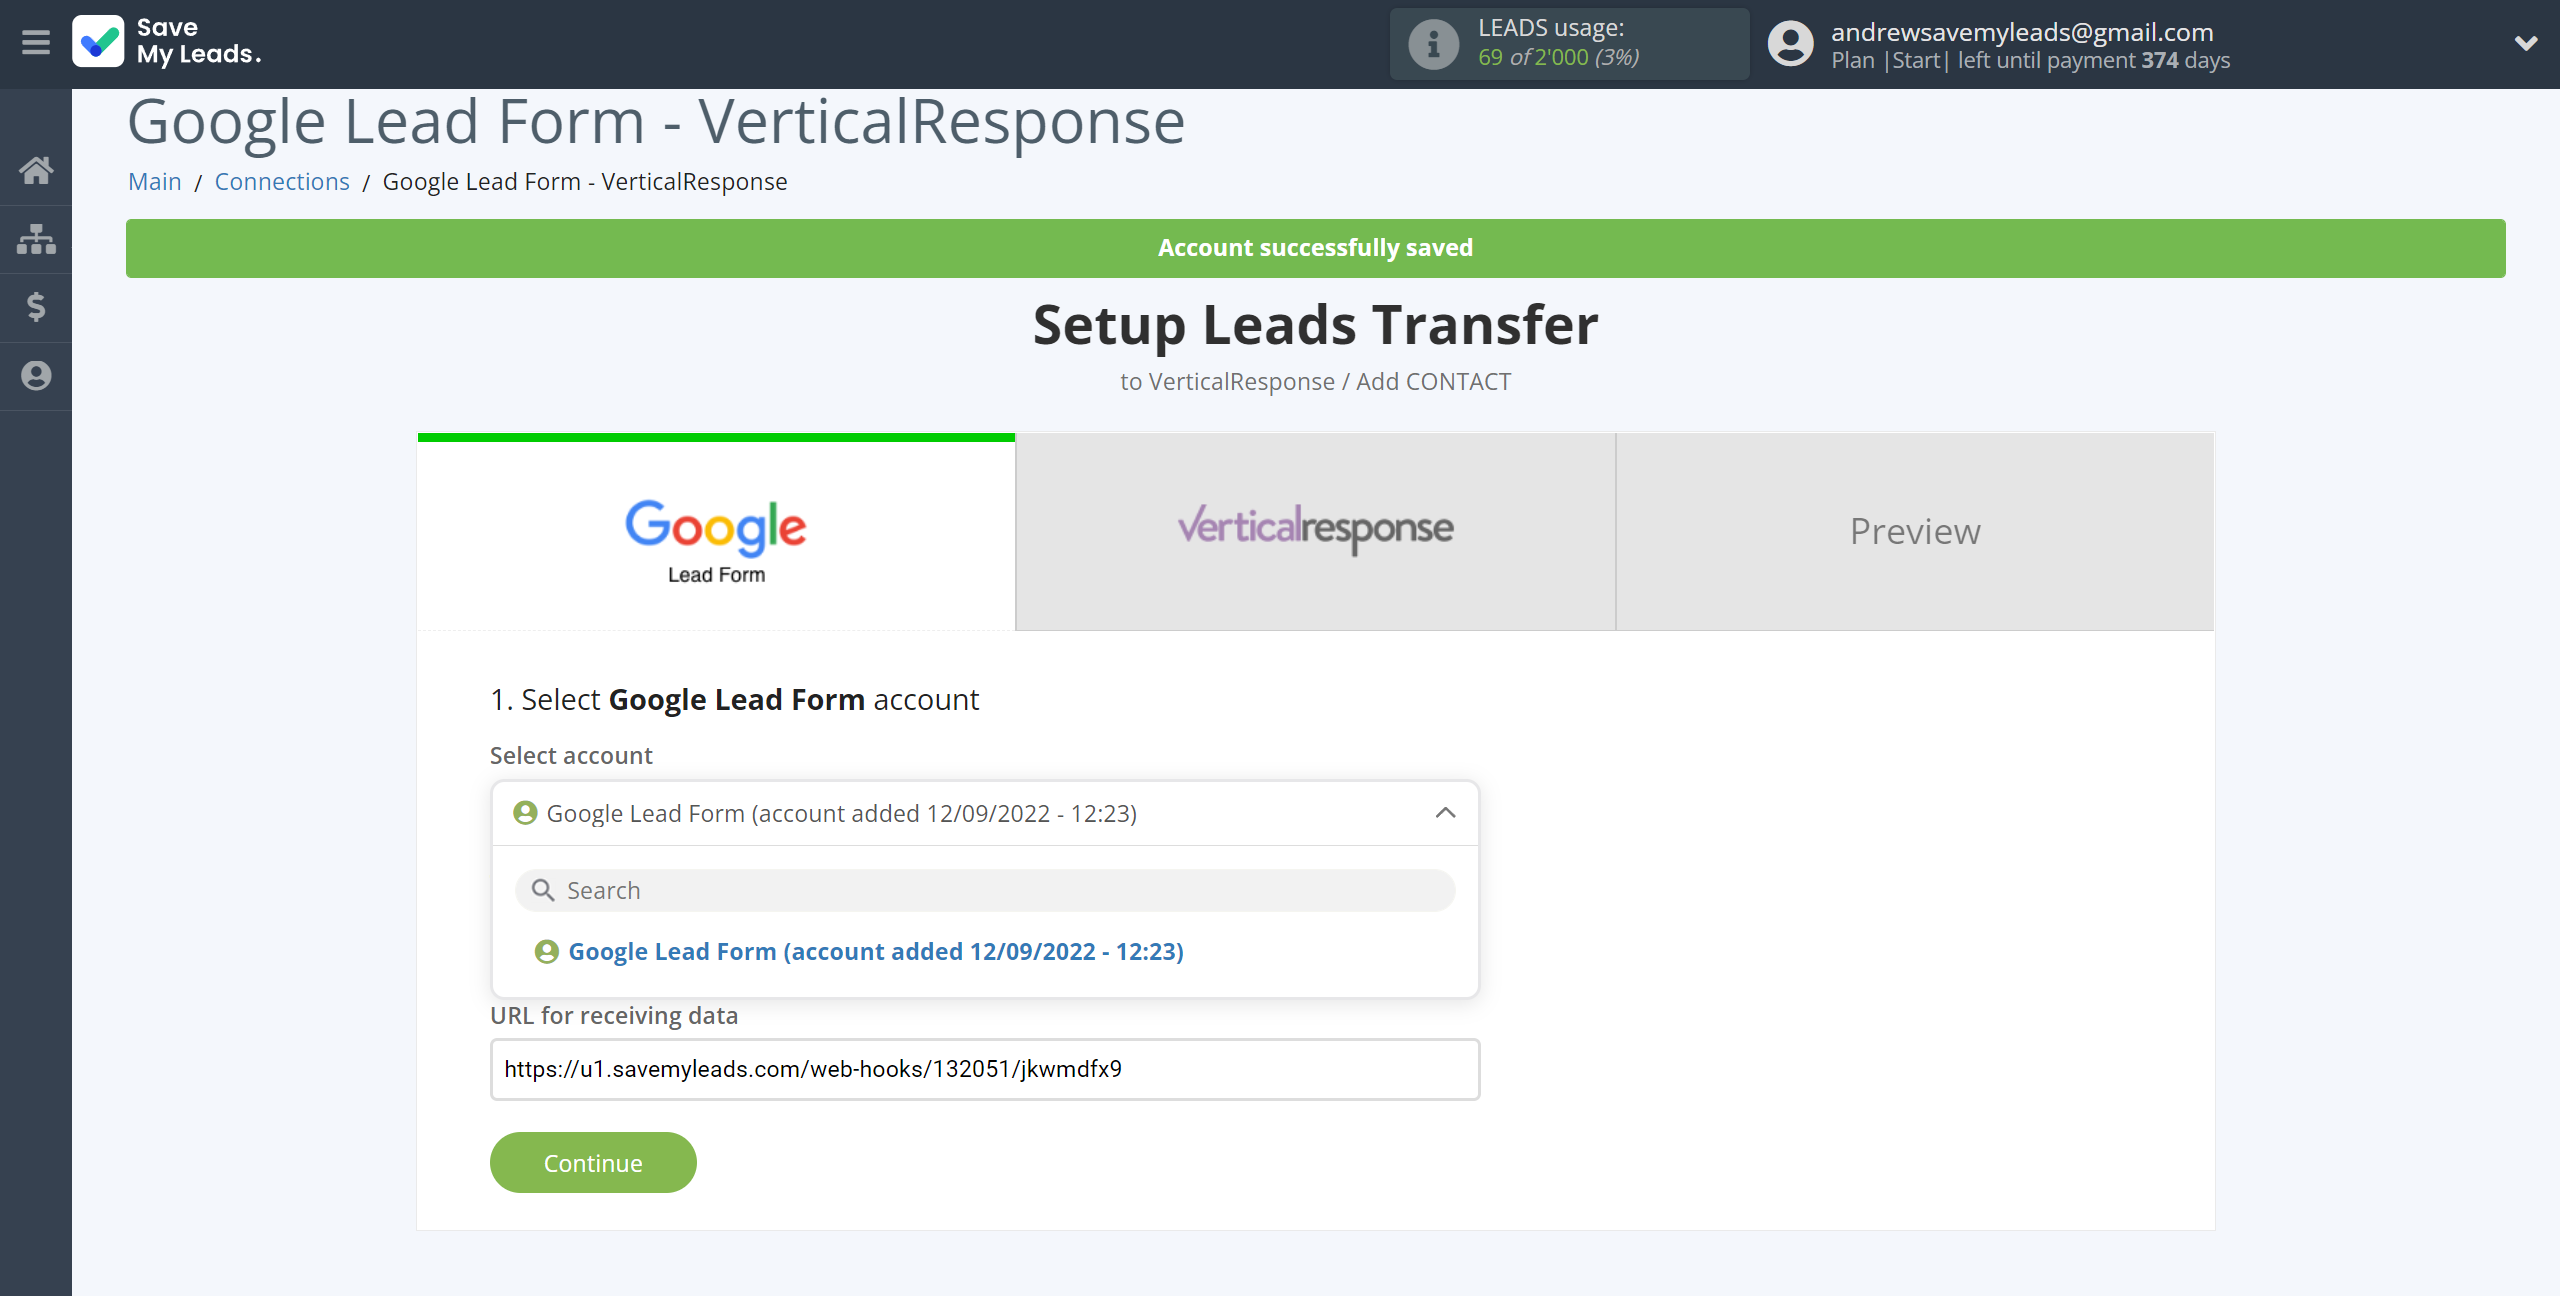 How to Connect Google Lead Form with VerticalResponse | Data Source account selection